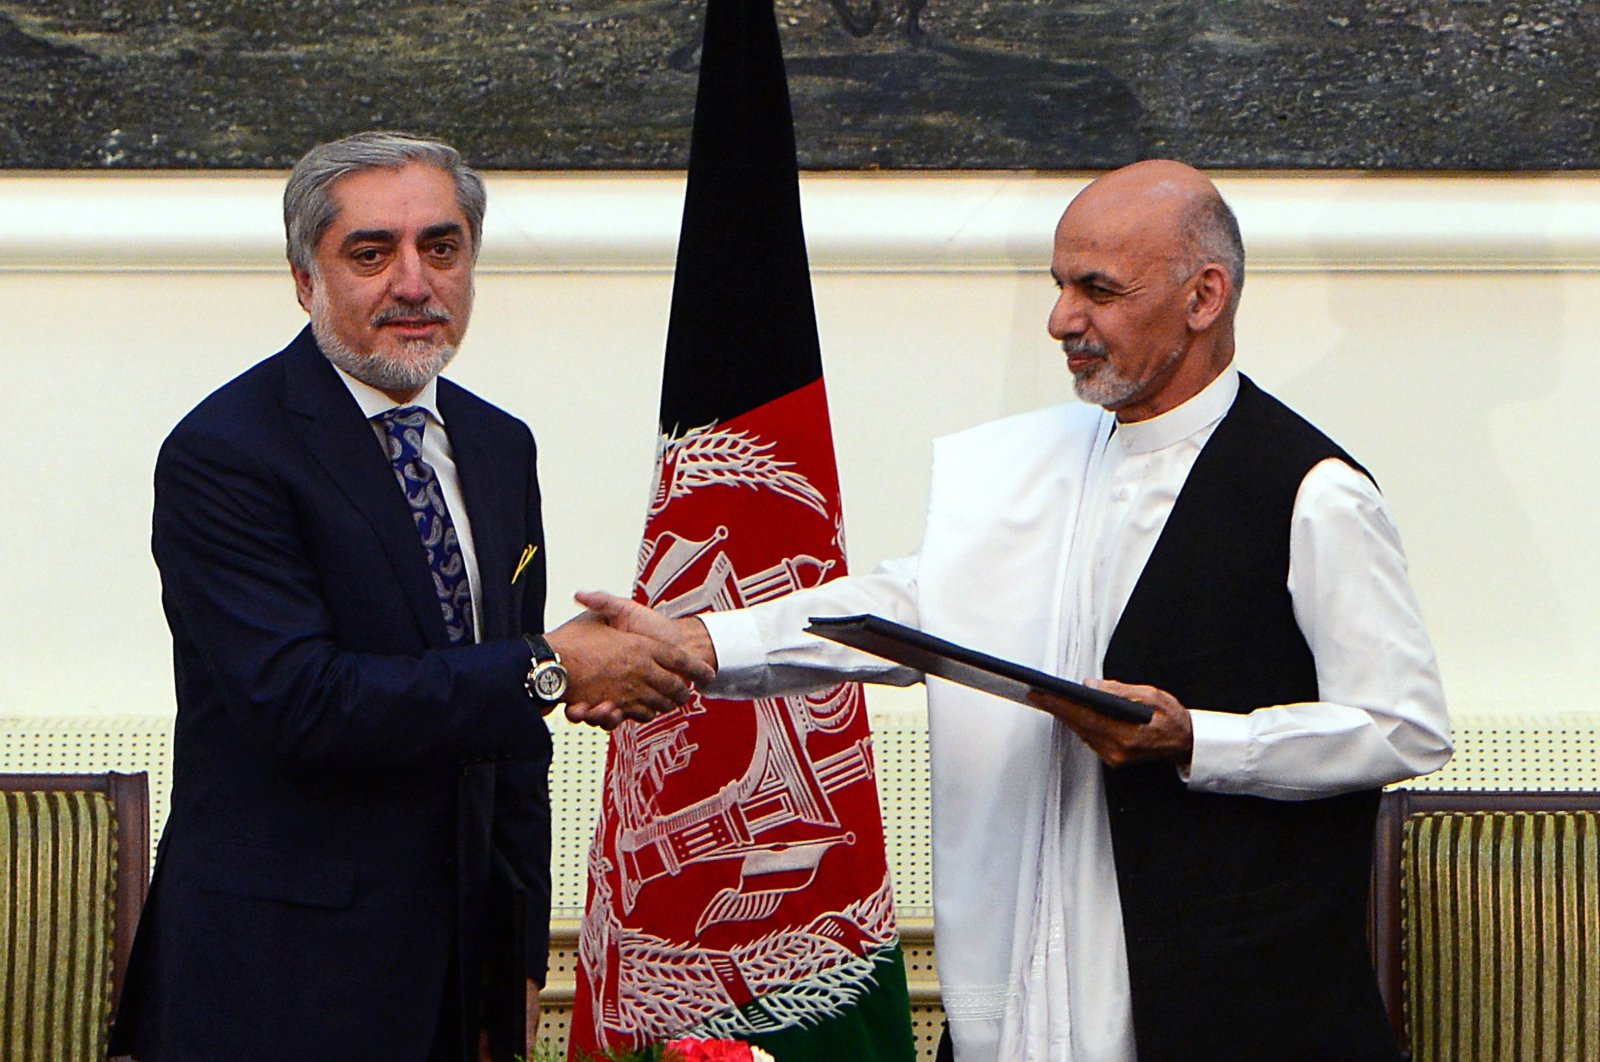 In this file photo, Afghan presidential candidates Abdullah Abdullah (L) and Ashraf Ghani Ahmadzai shake hands after signing a power-sharing agreement at the Presidential Palace in Kabul on Sept. 21, 2014. (AFP Photo)